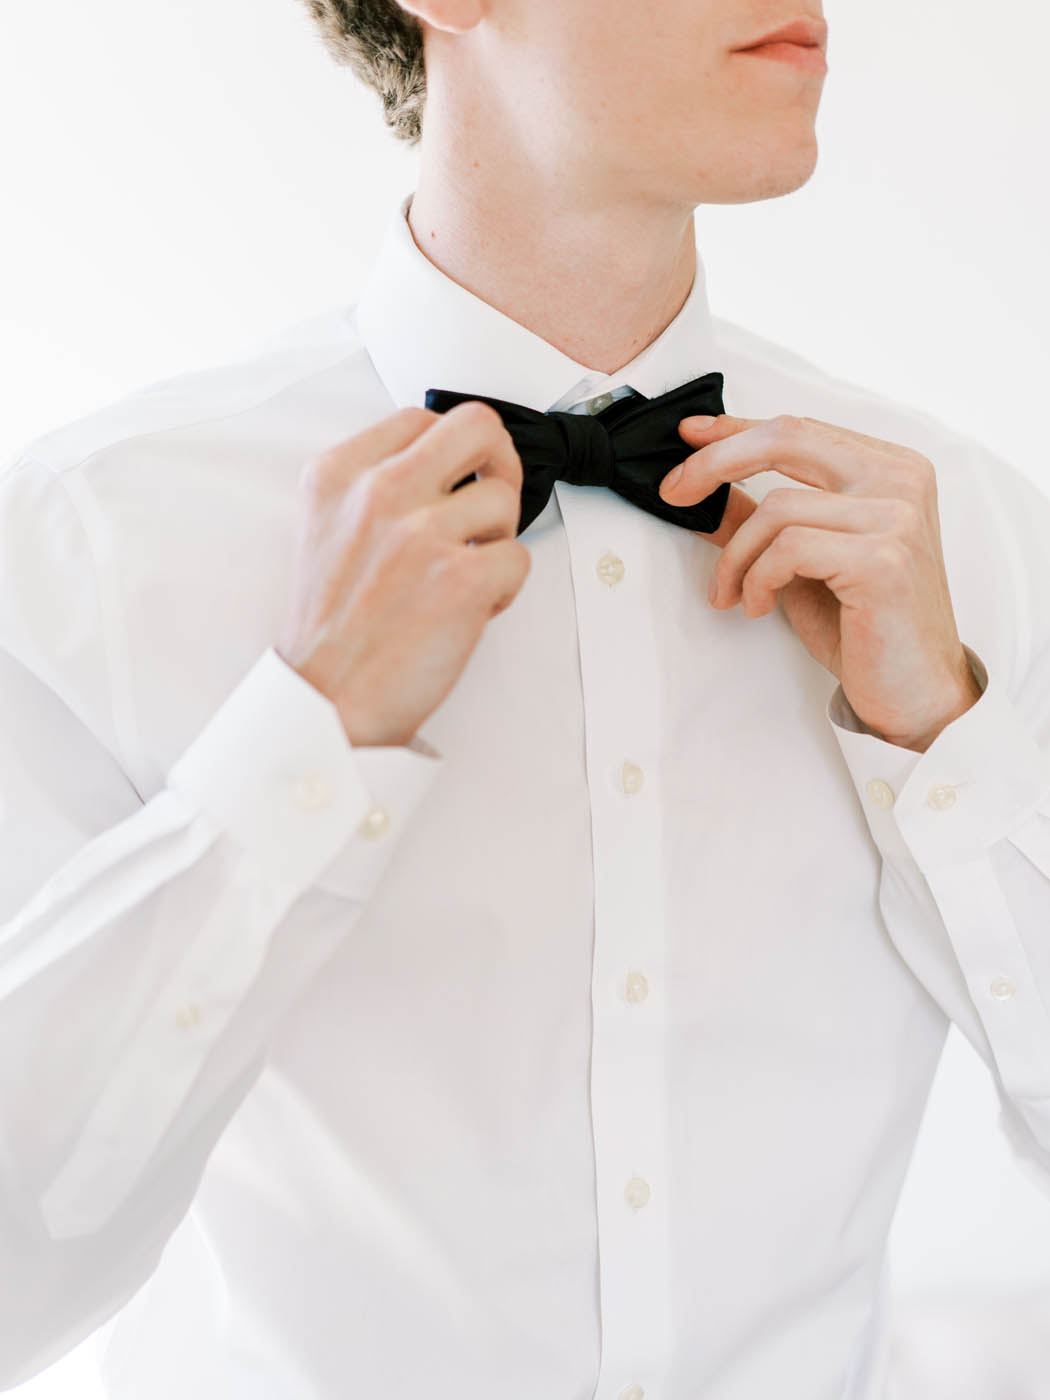 the groom tightens his tie as he gets ready to get married